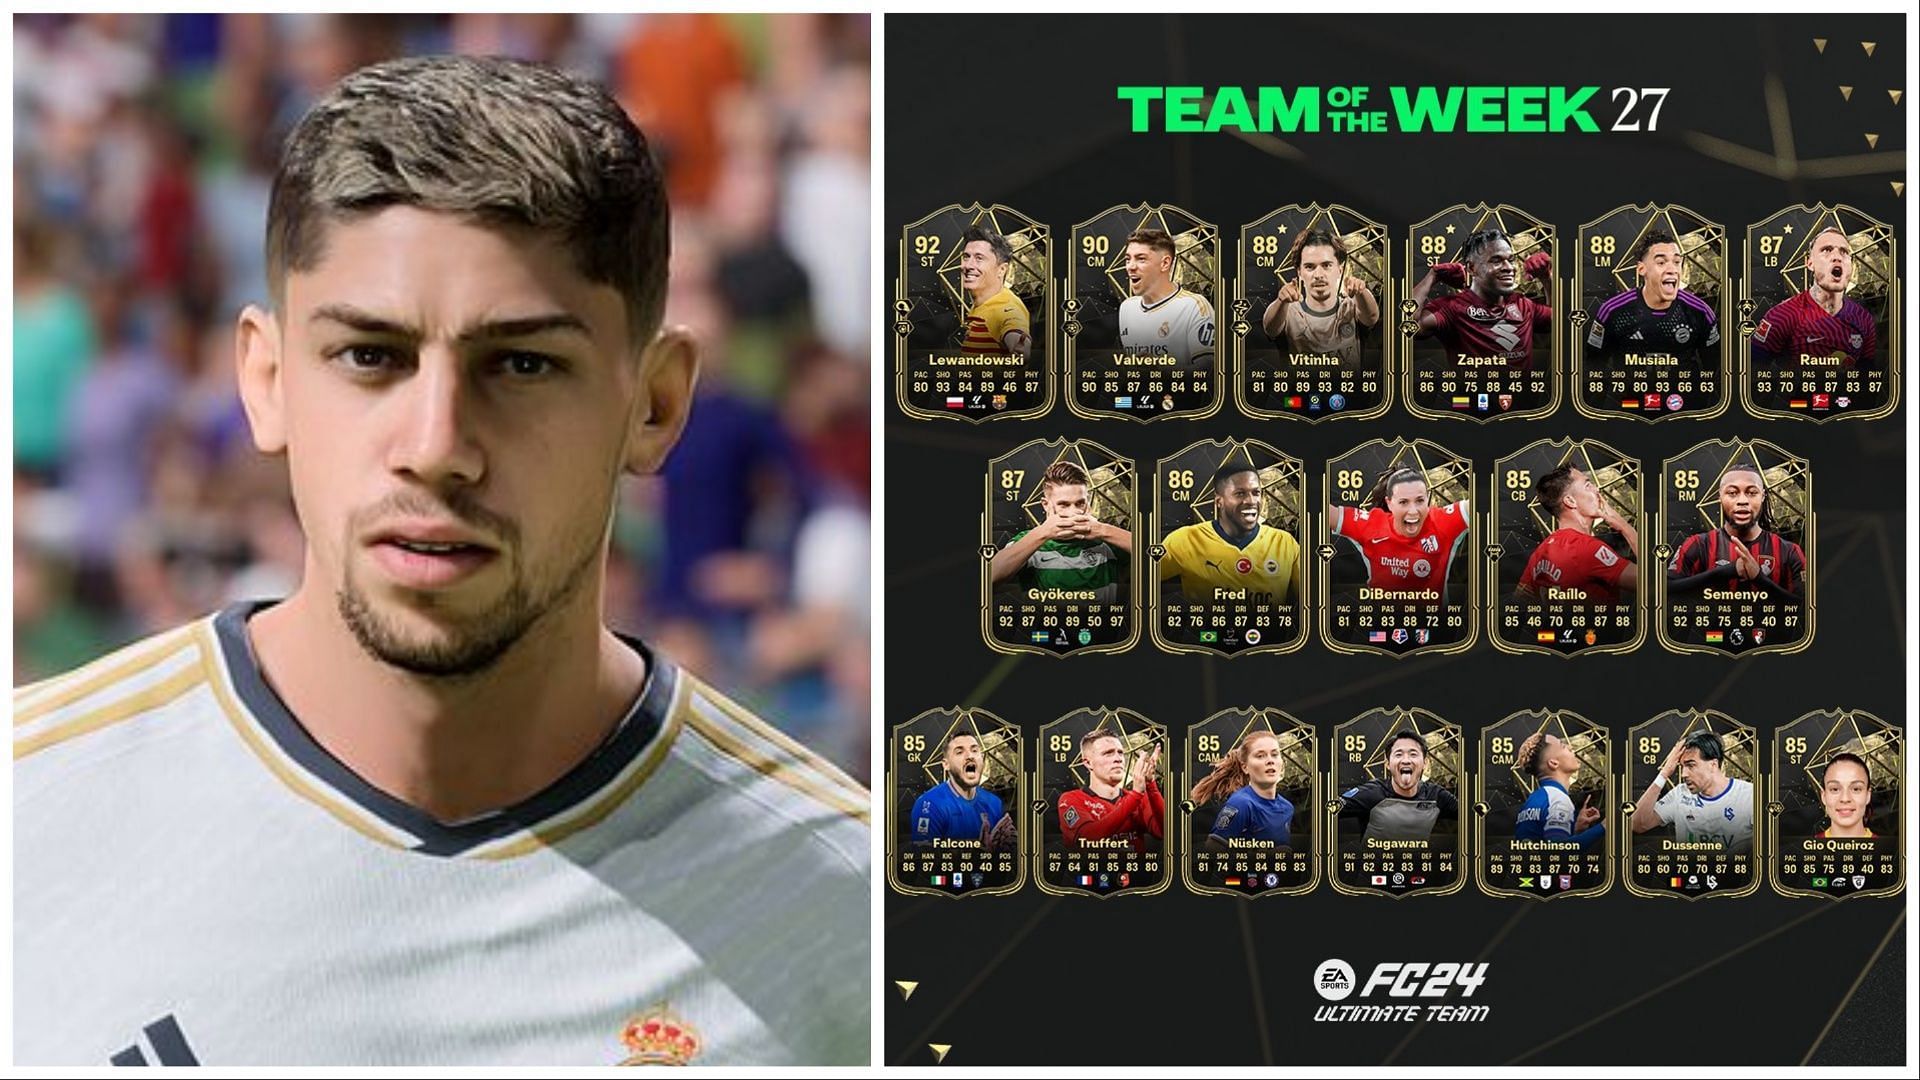 The EA FC 24 TOTW 27 lineup is now live